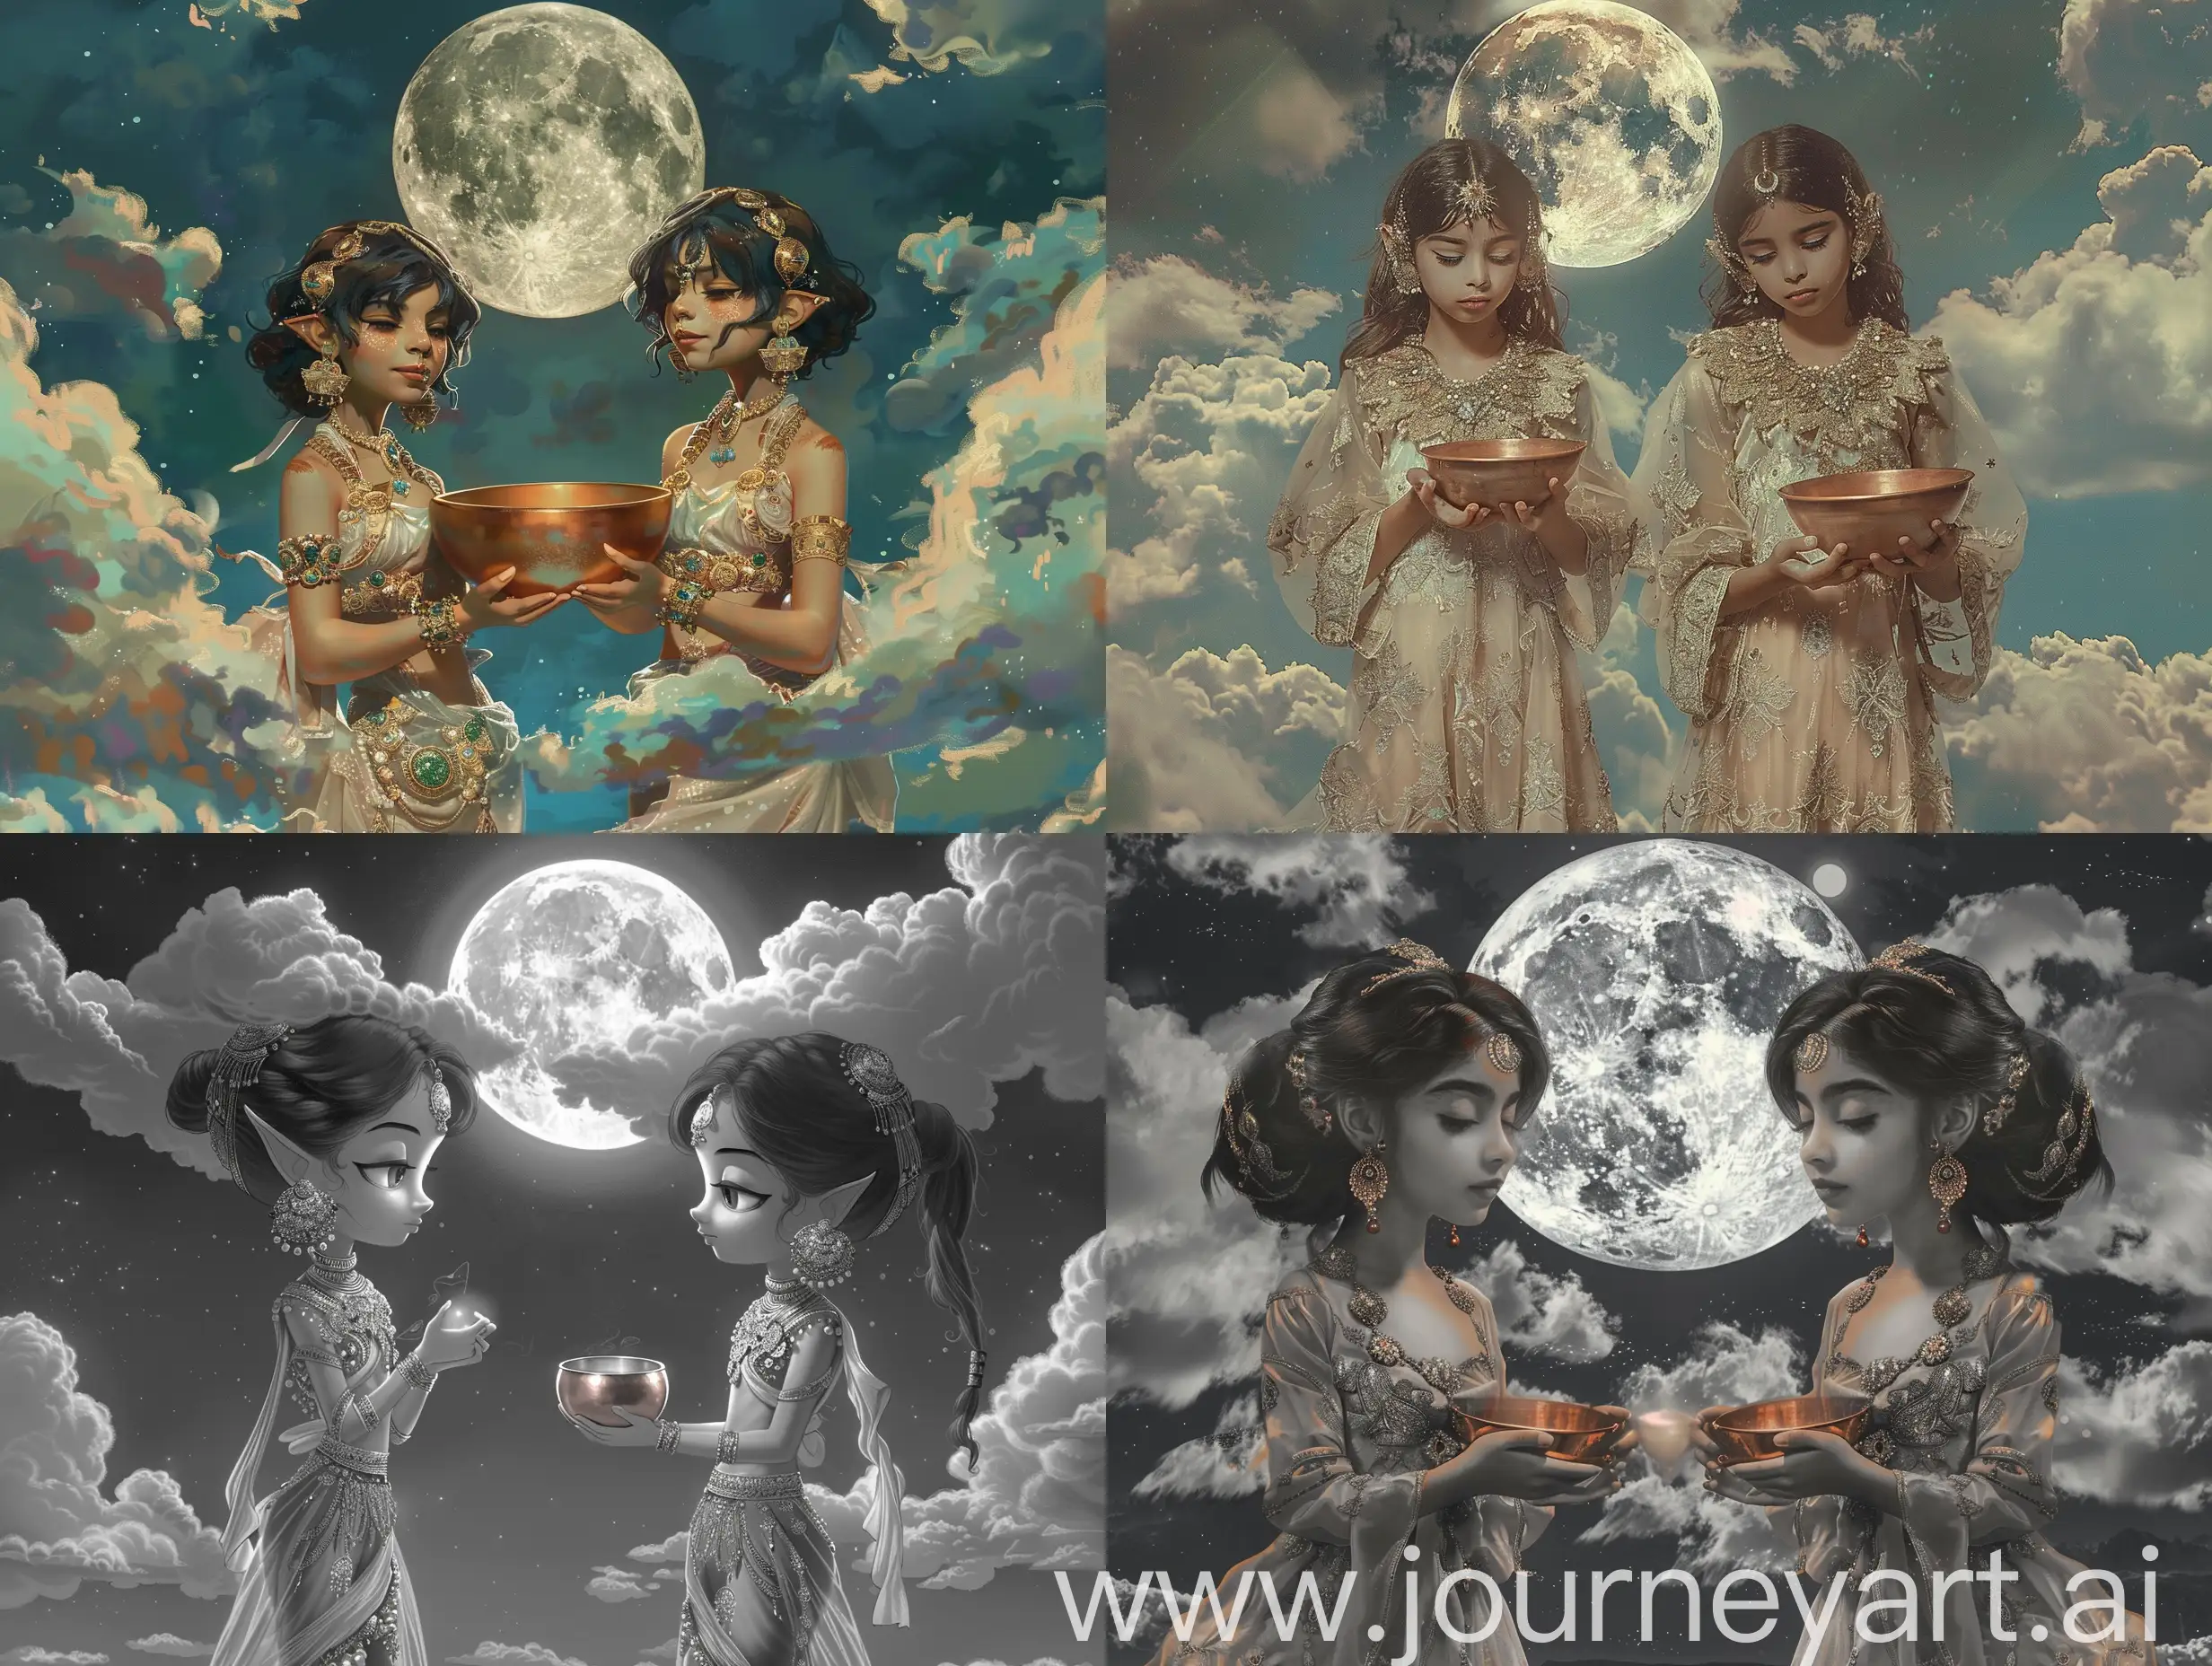 Enchanting-Twin-Princesses-Under-Moonlight-with-a-Copper-Bowl